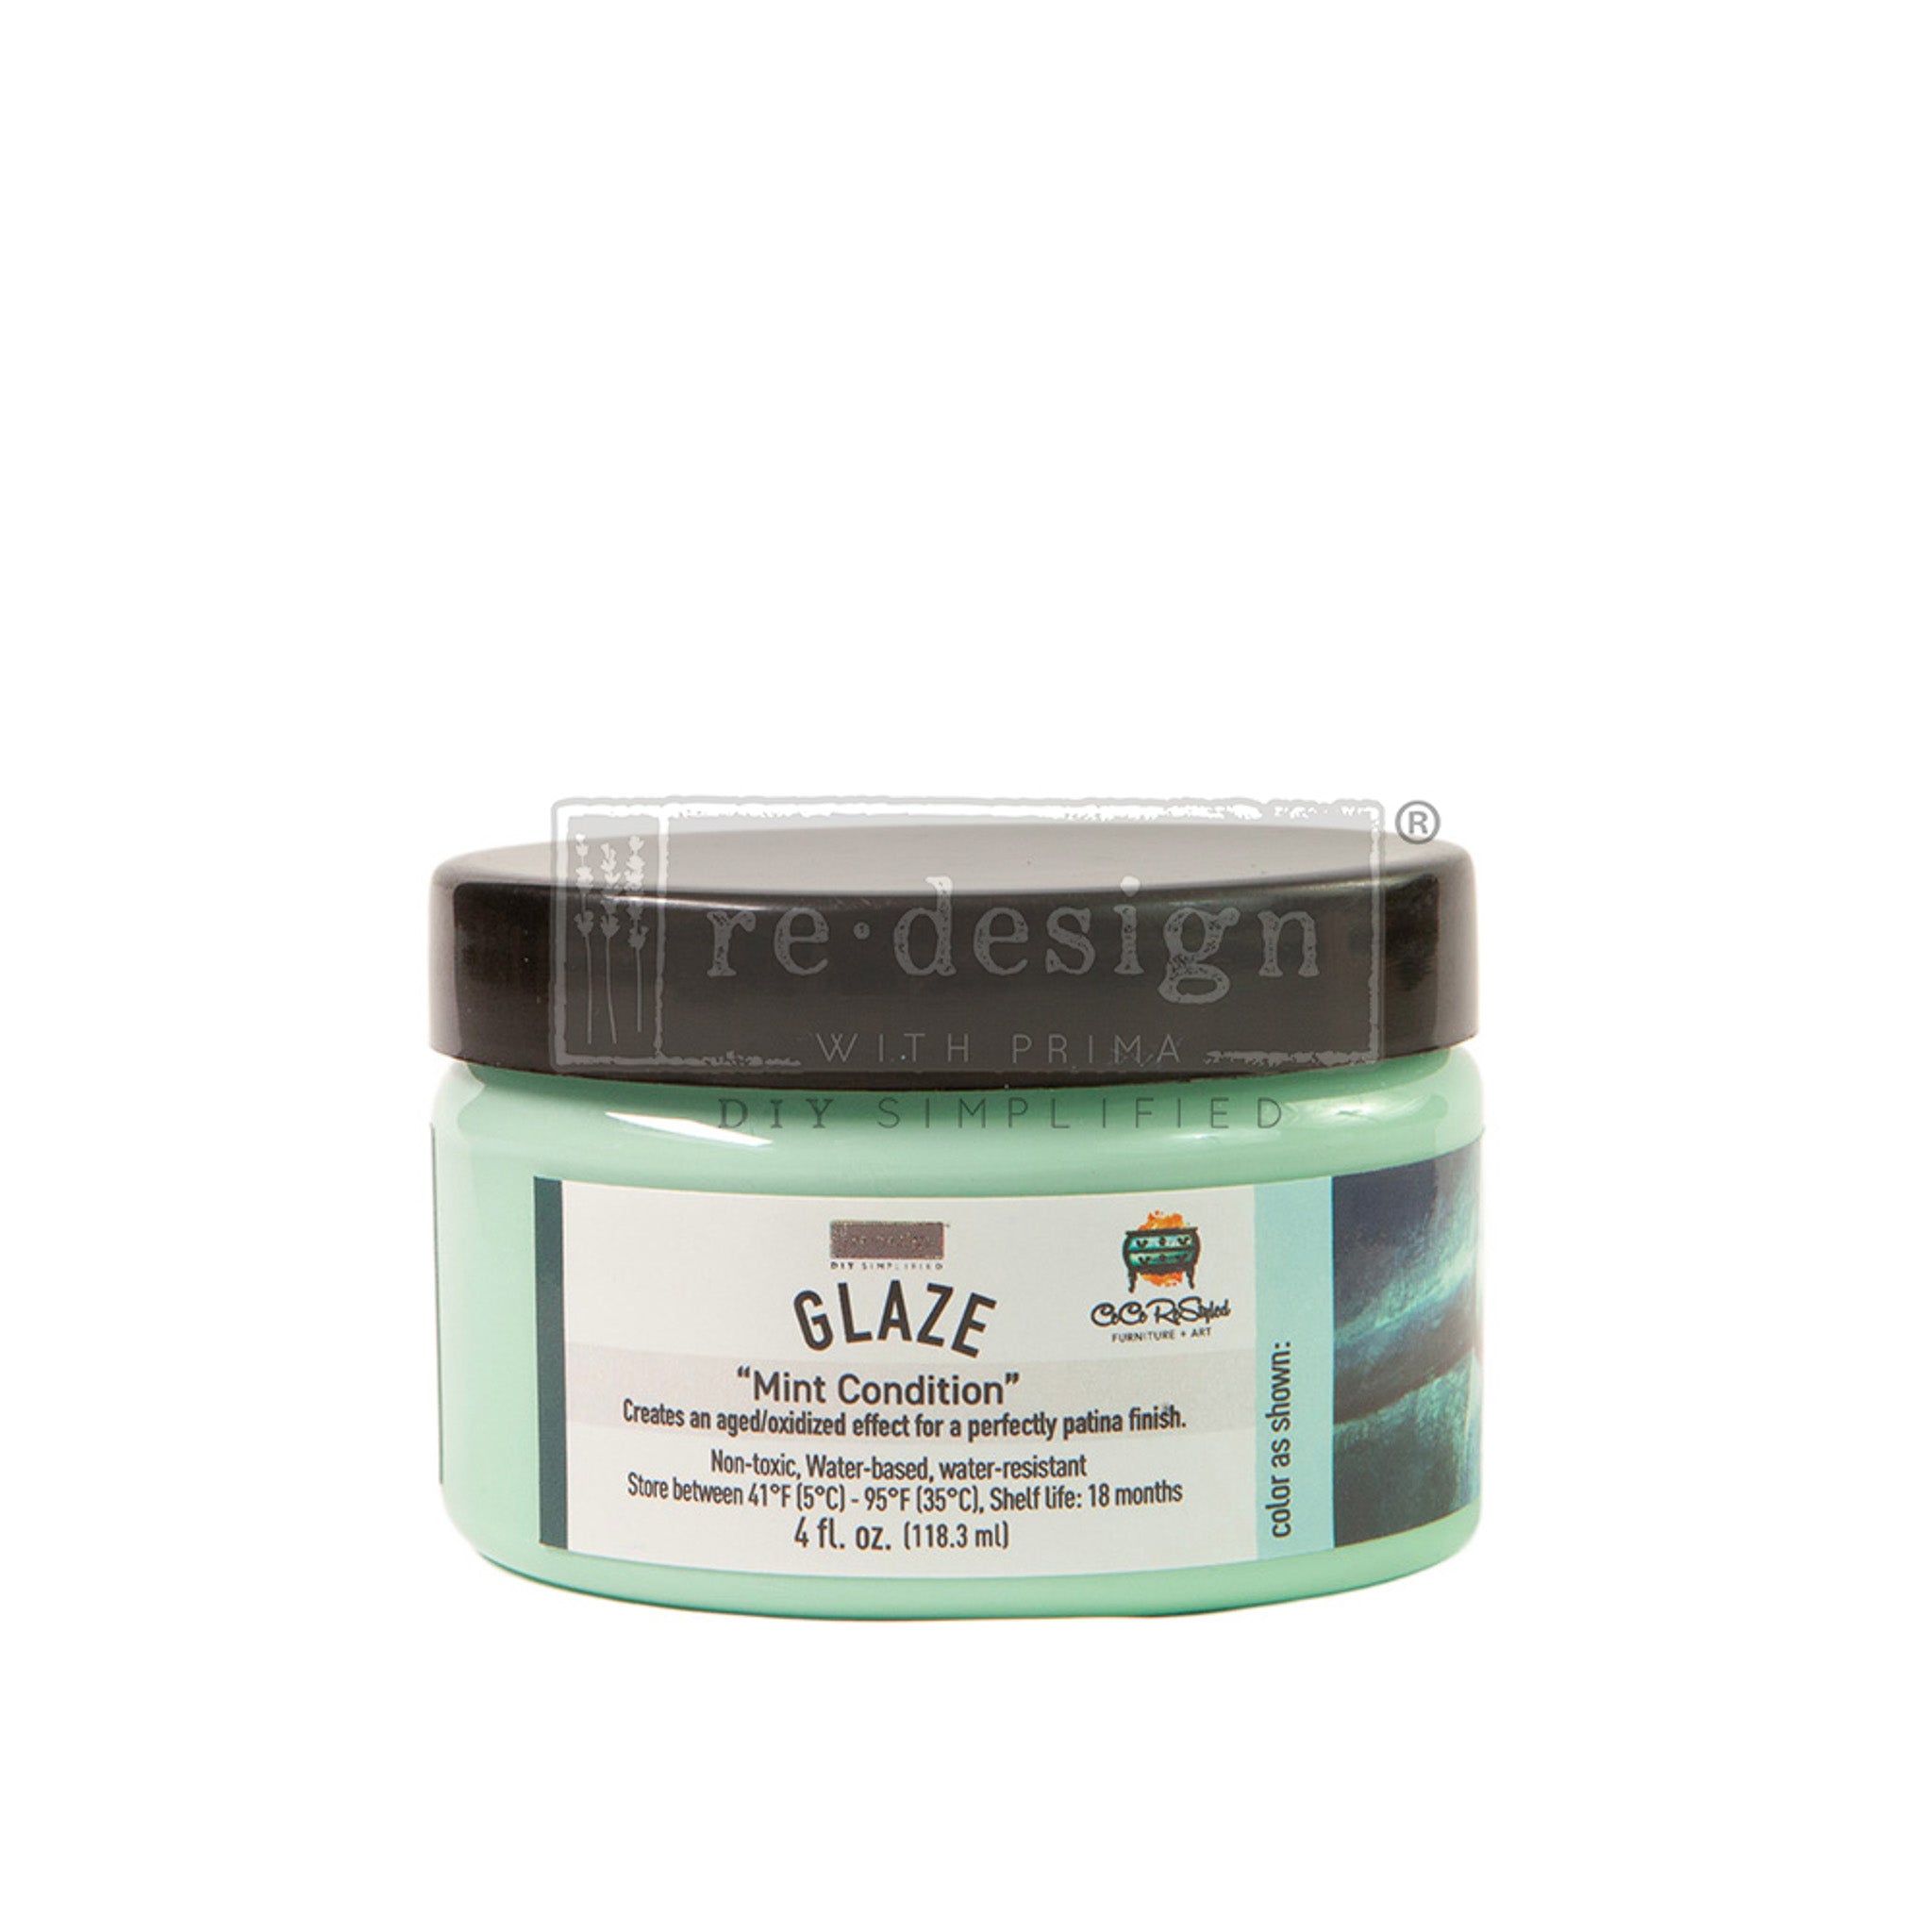 A 4oz (118.3 ml) container of ReDesign with Prima's Mint Condition Glaze by CeCe ReStyled is against a white background,